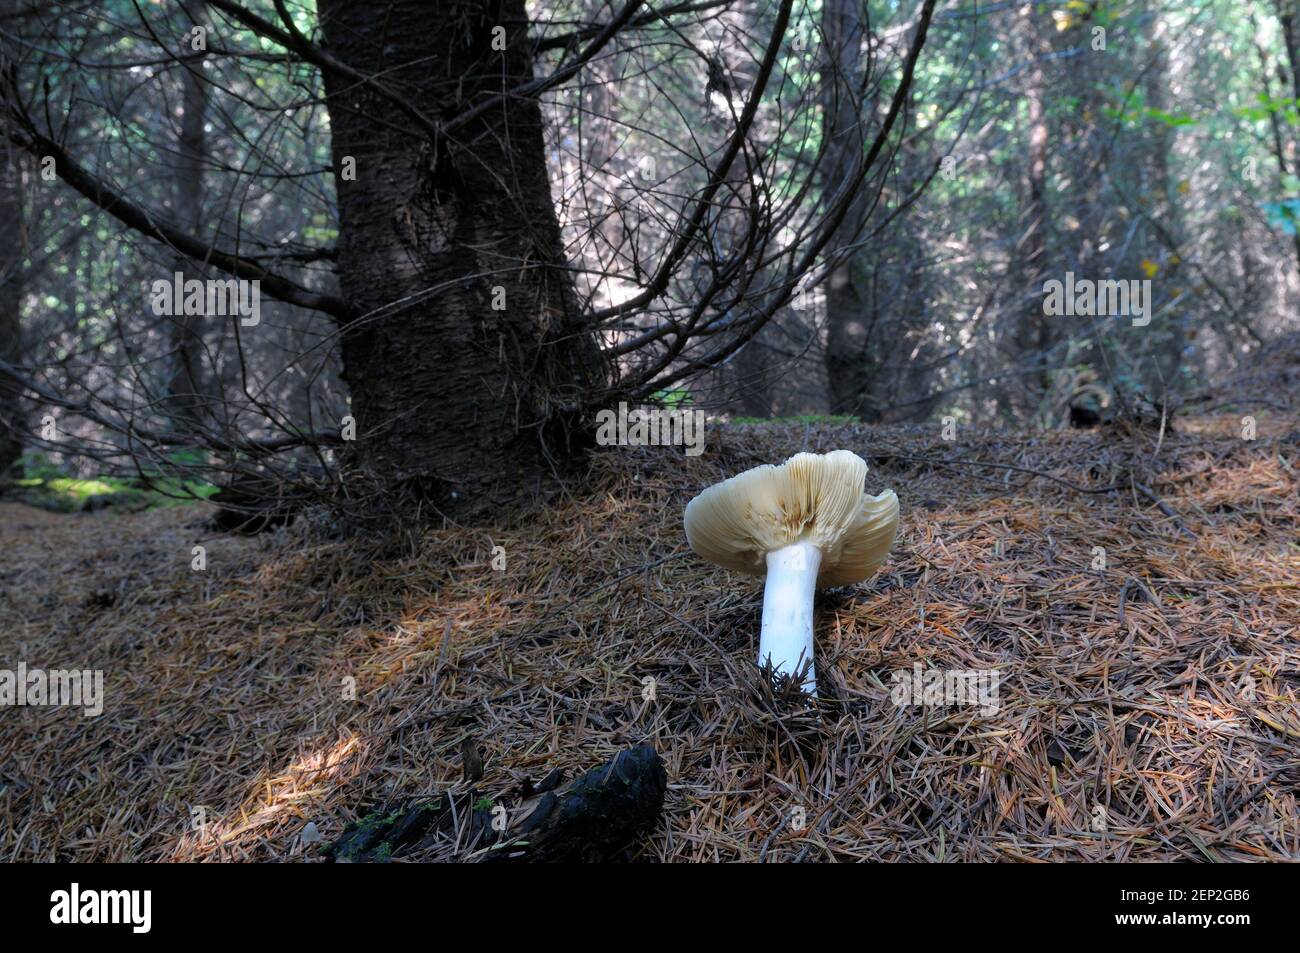 Russula mushroom growing in a dark forest in pine needles Stock Photo